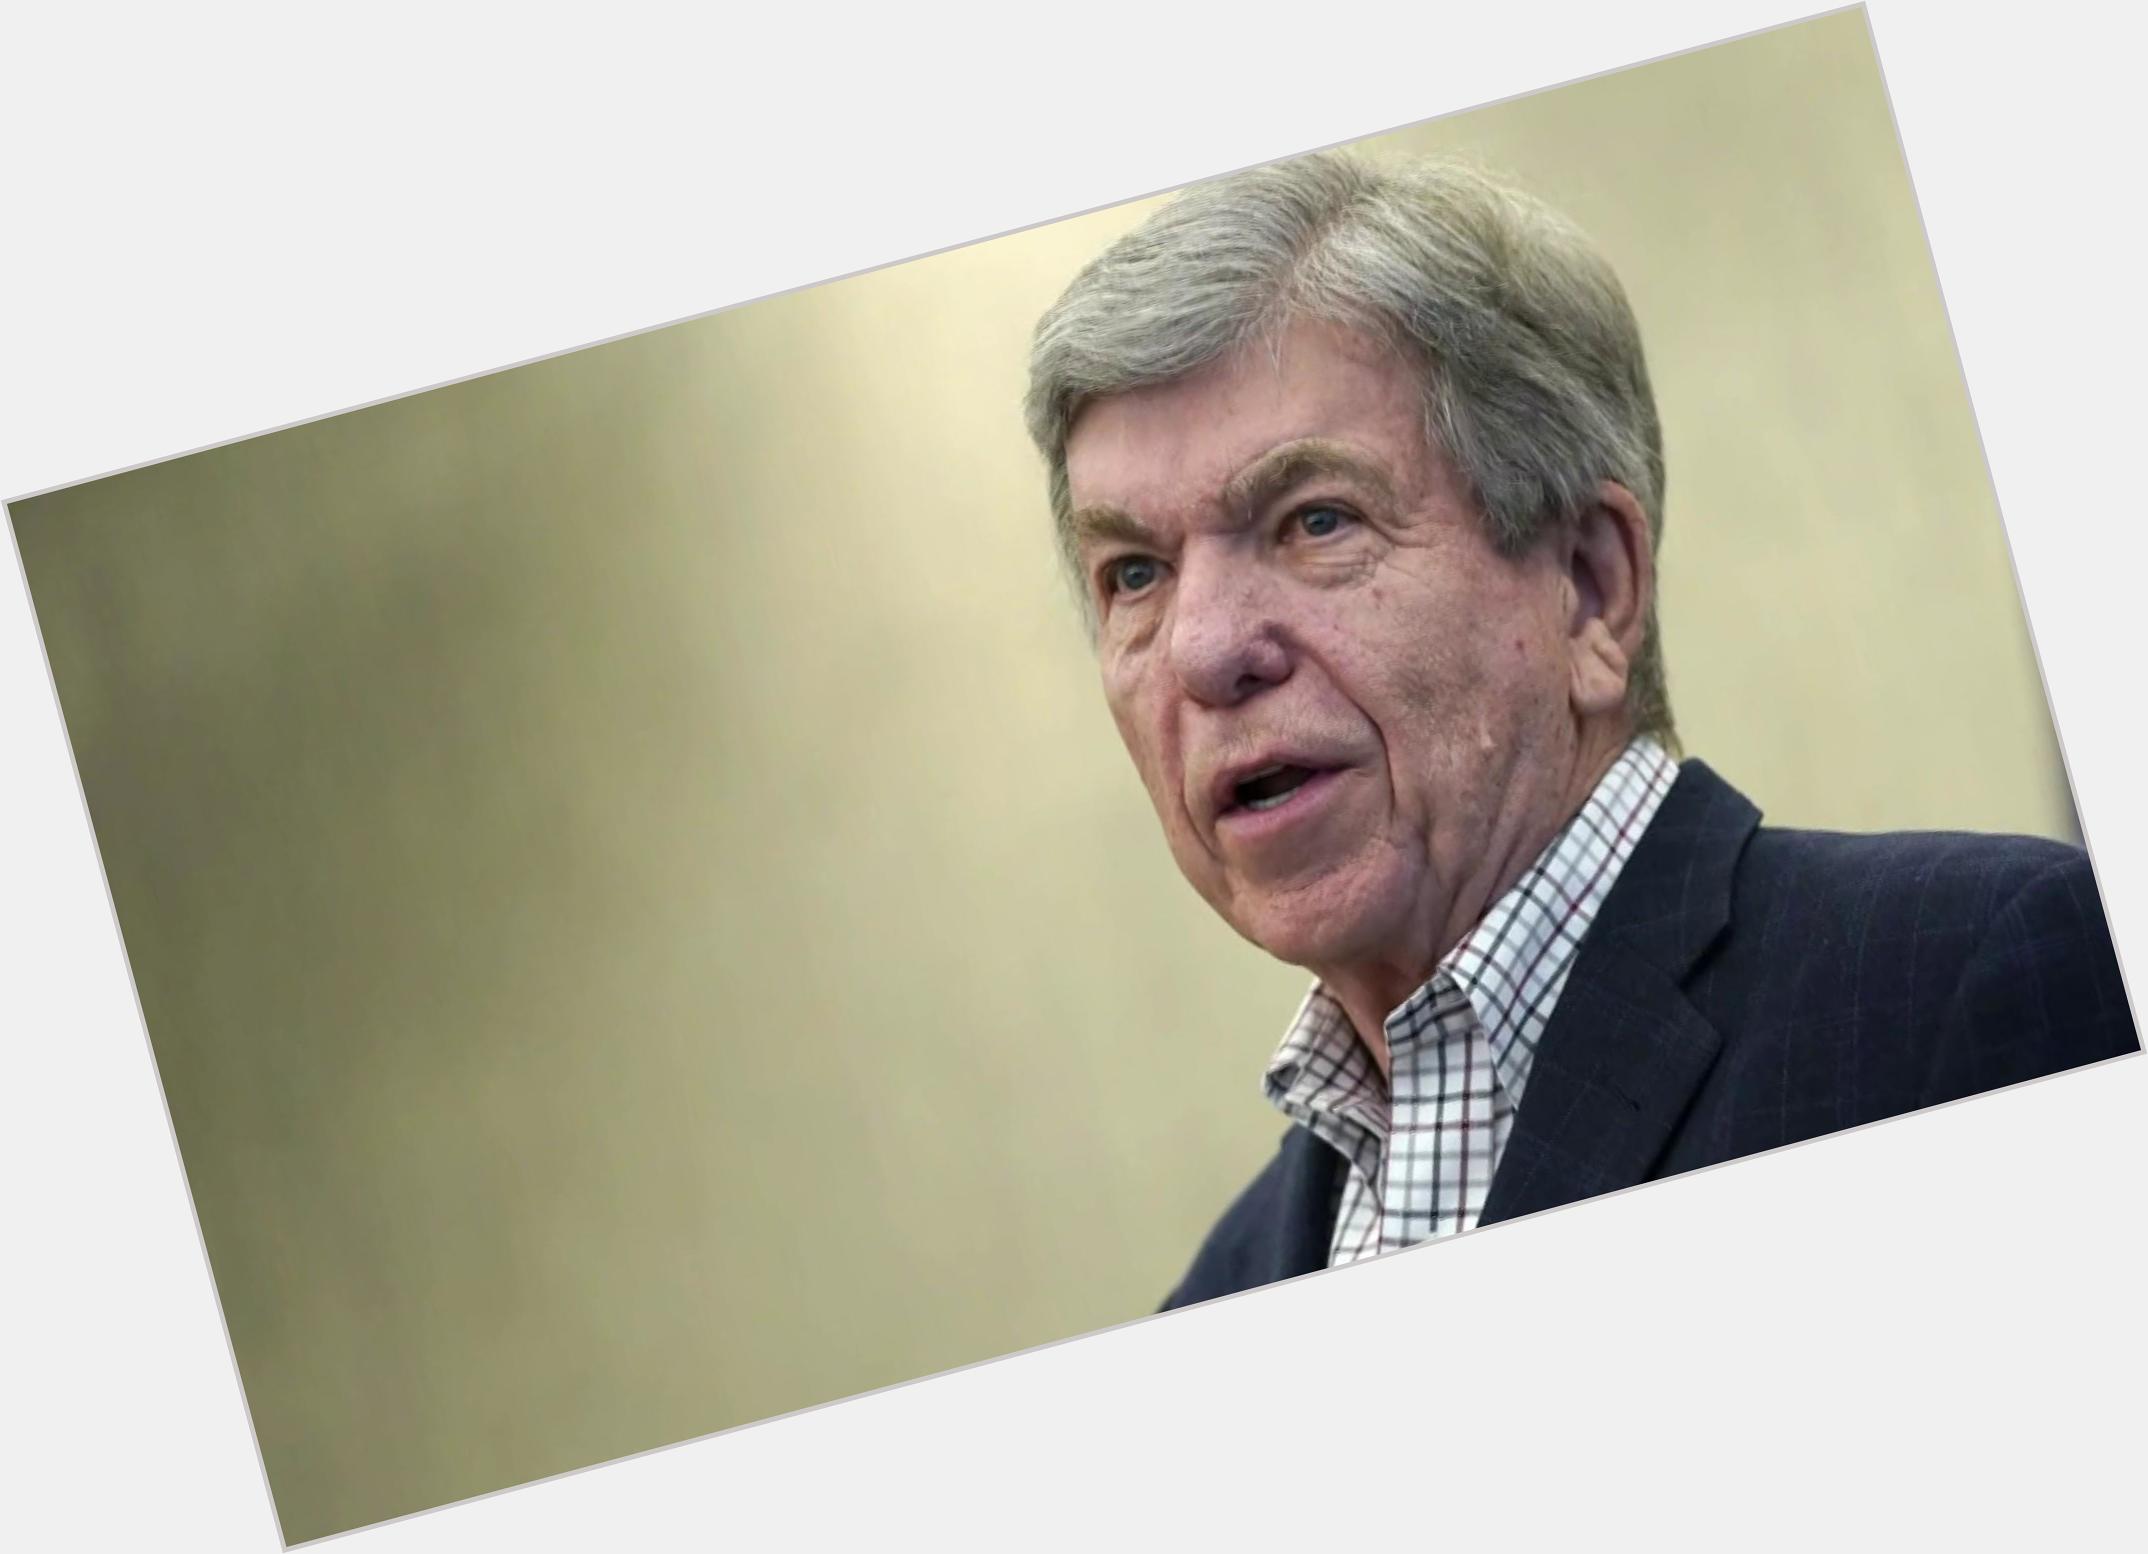 Http://fanpagepress.net/m/R/Roy Blunt New Pic 1